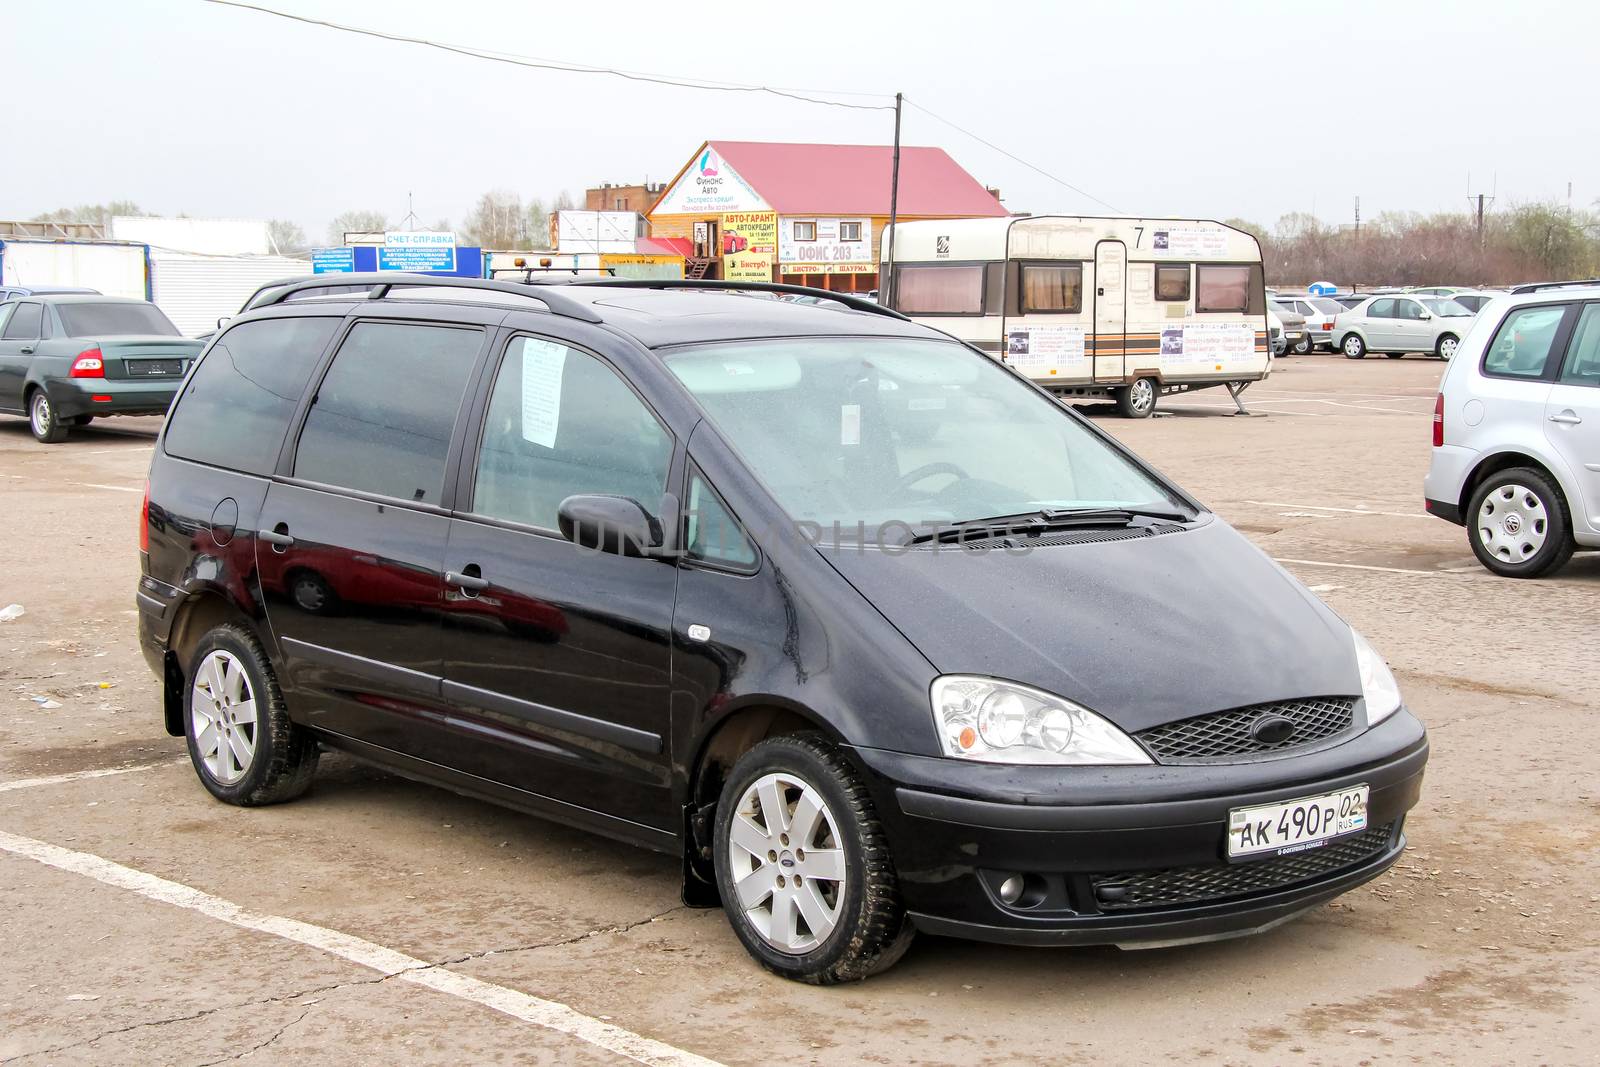 UFA, RUSSIA - APRIL 19, 2012: Motor car Ford Galaxy at the used cars trade center.